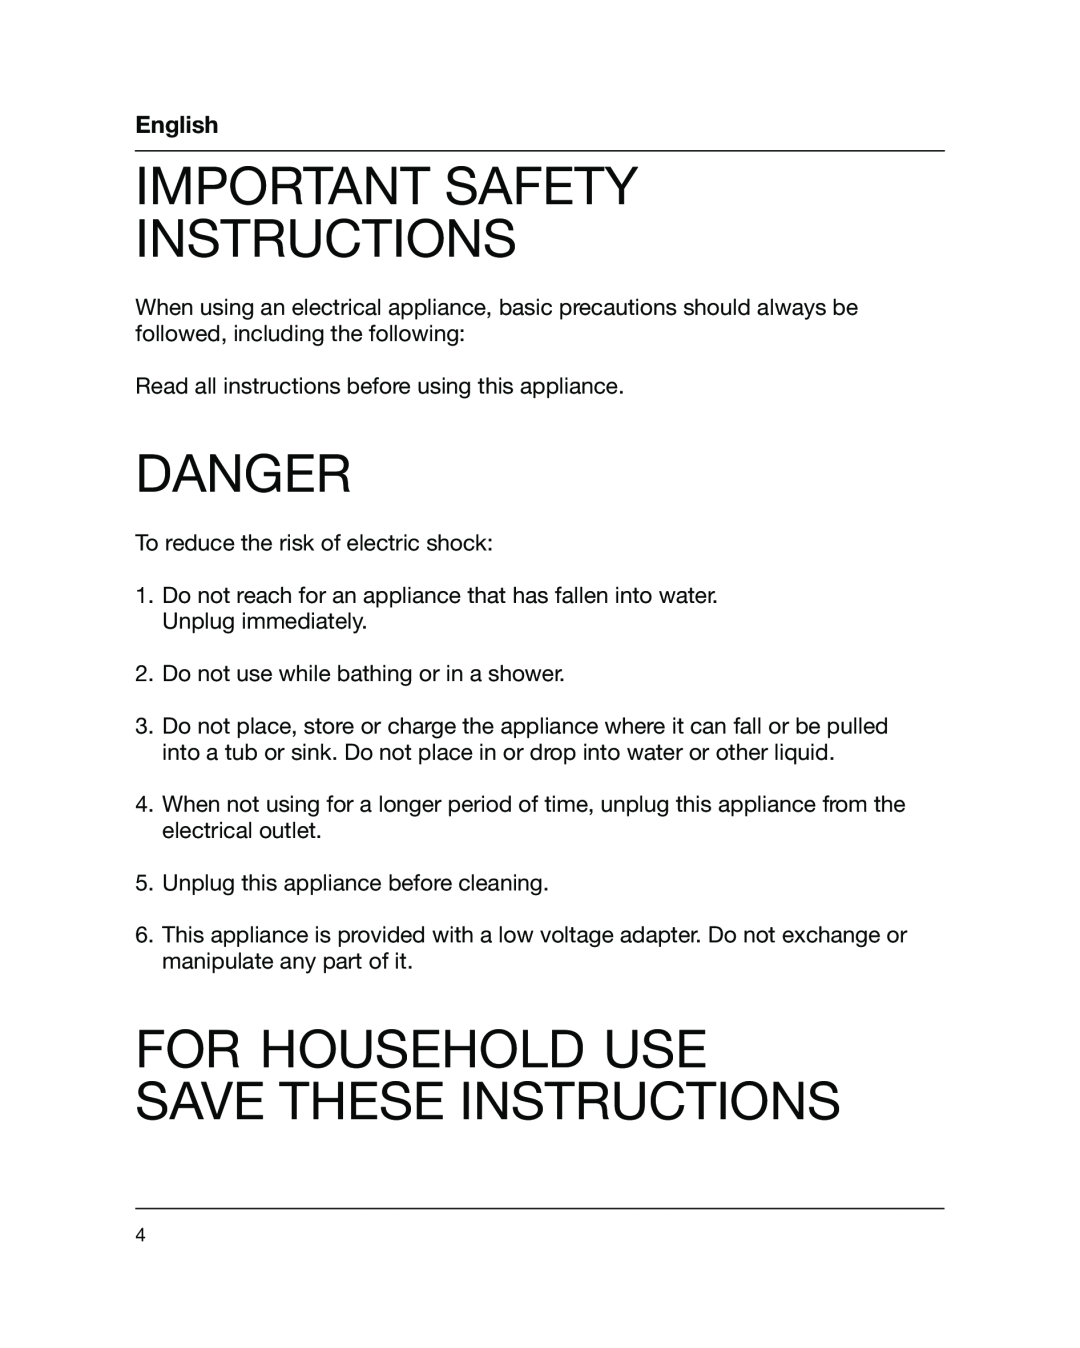 Braun 5441 manual Important Safety Instructions, Danger, For Household Use Save These Instructions, English 